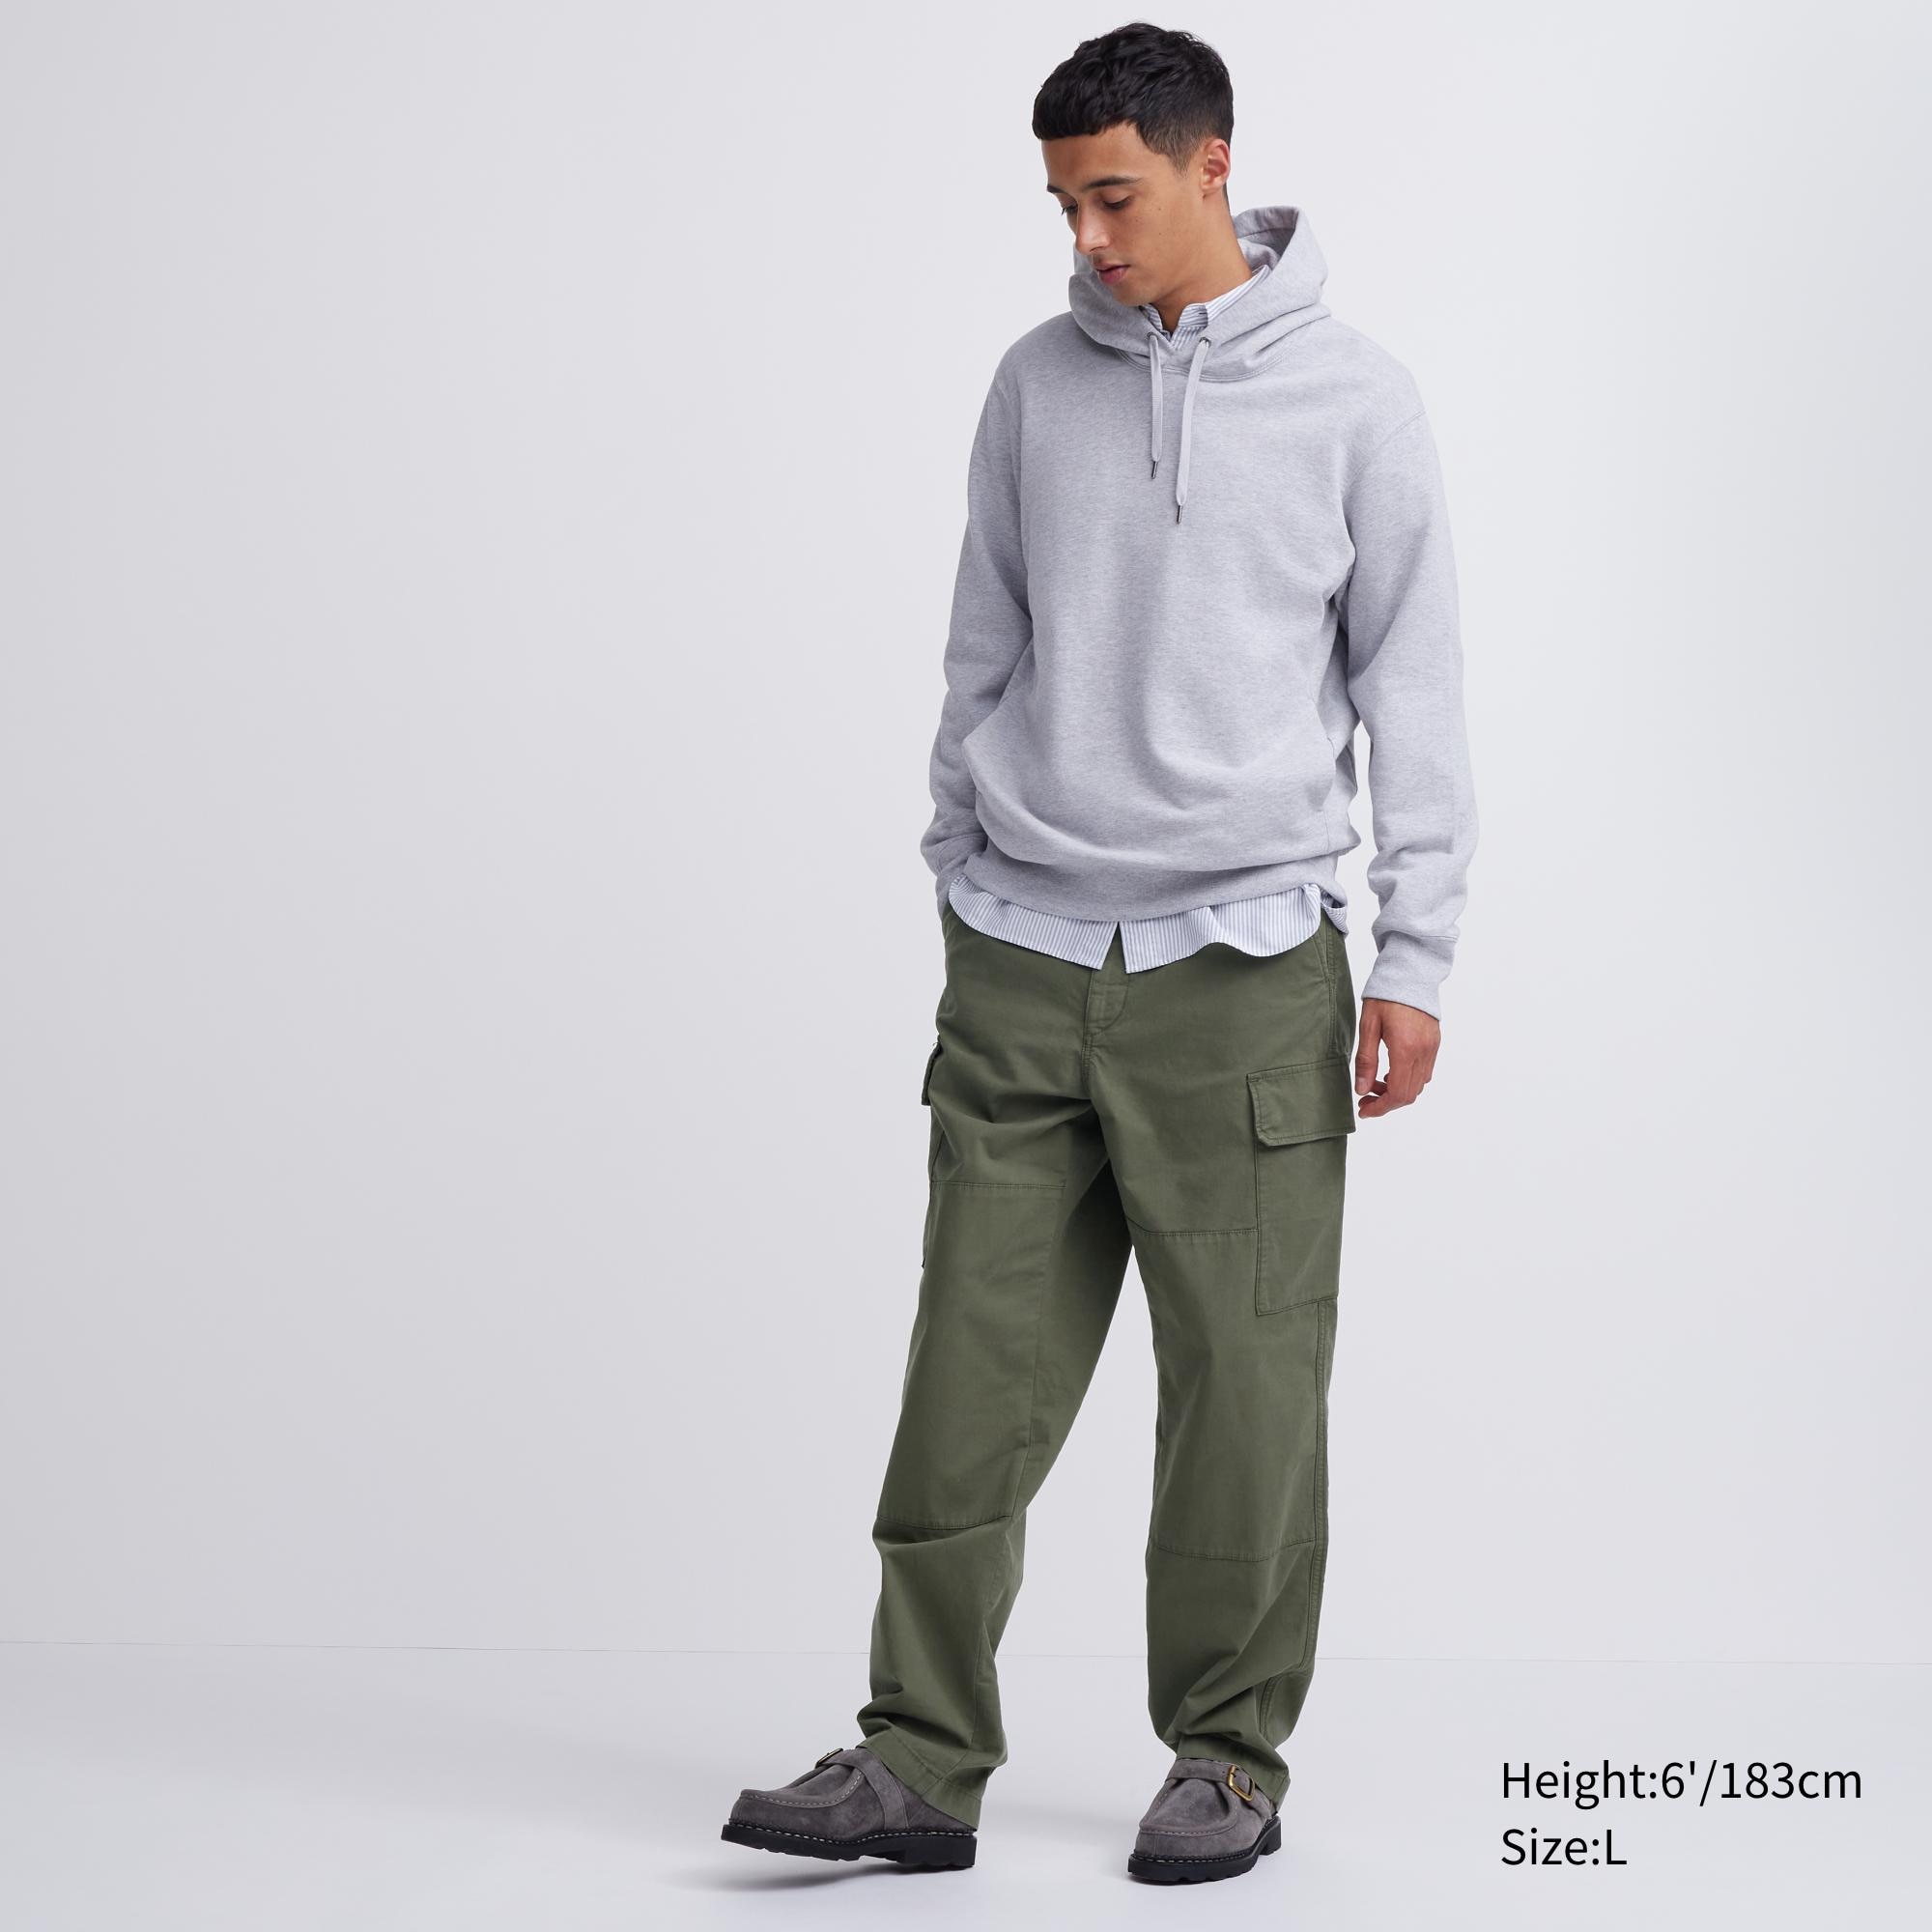 Buy Olive Trousers  Pants for Men by SUPERDRY Online  Ajiocom